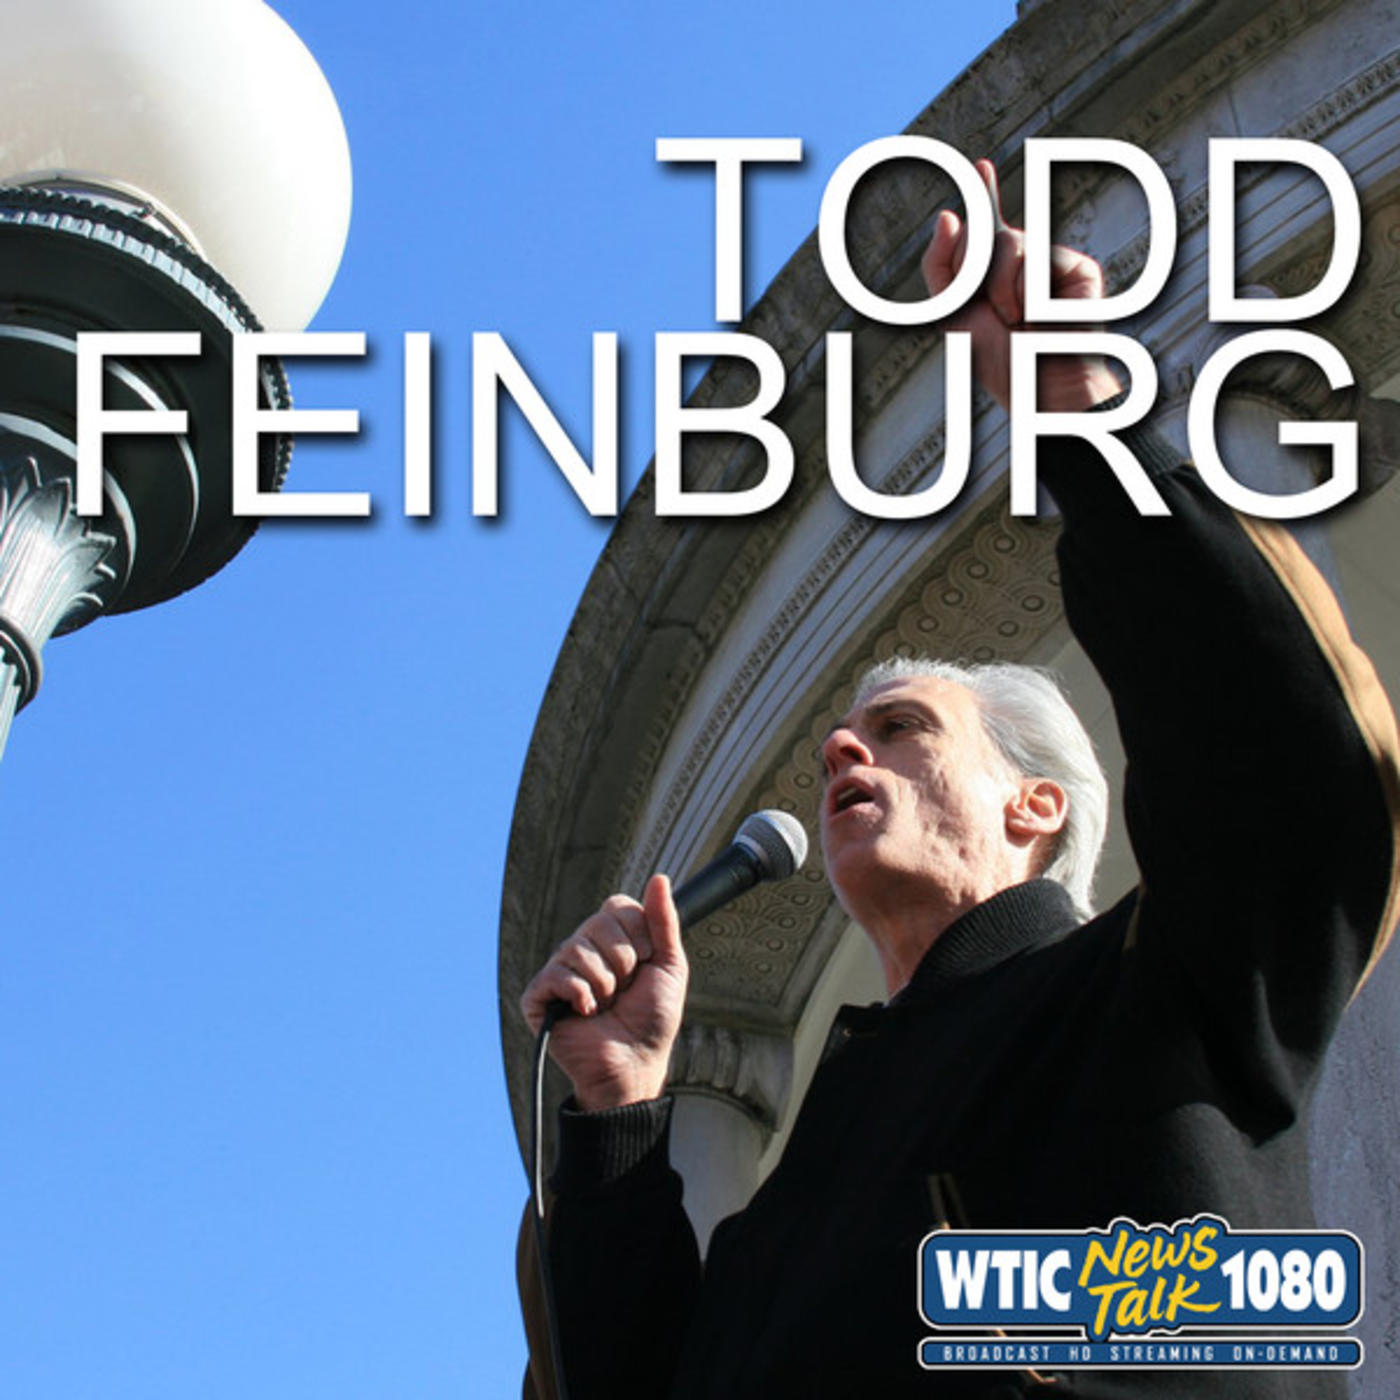 Todd Feinburg: Taking on the Blumenthal's with Dan Maymin (08/27/20)